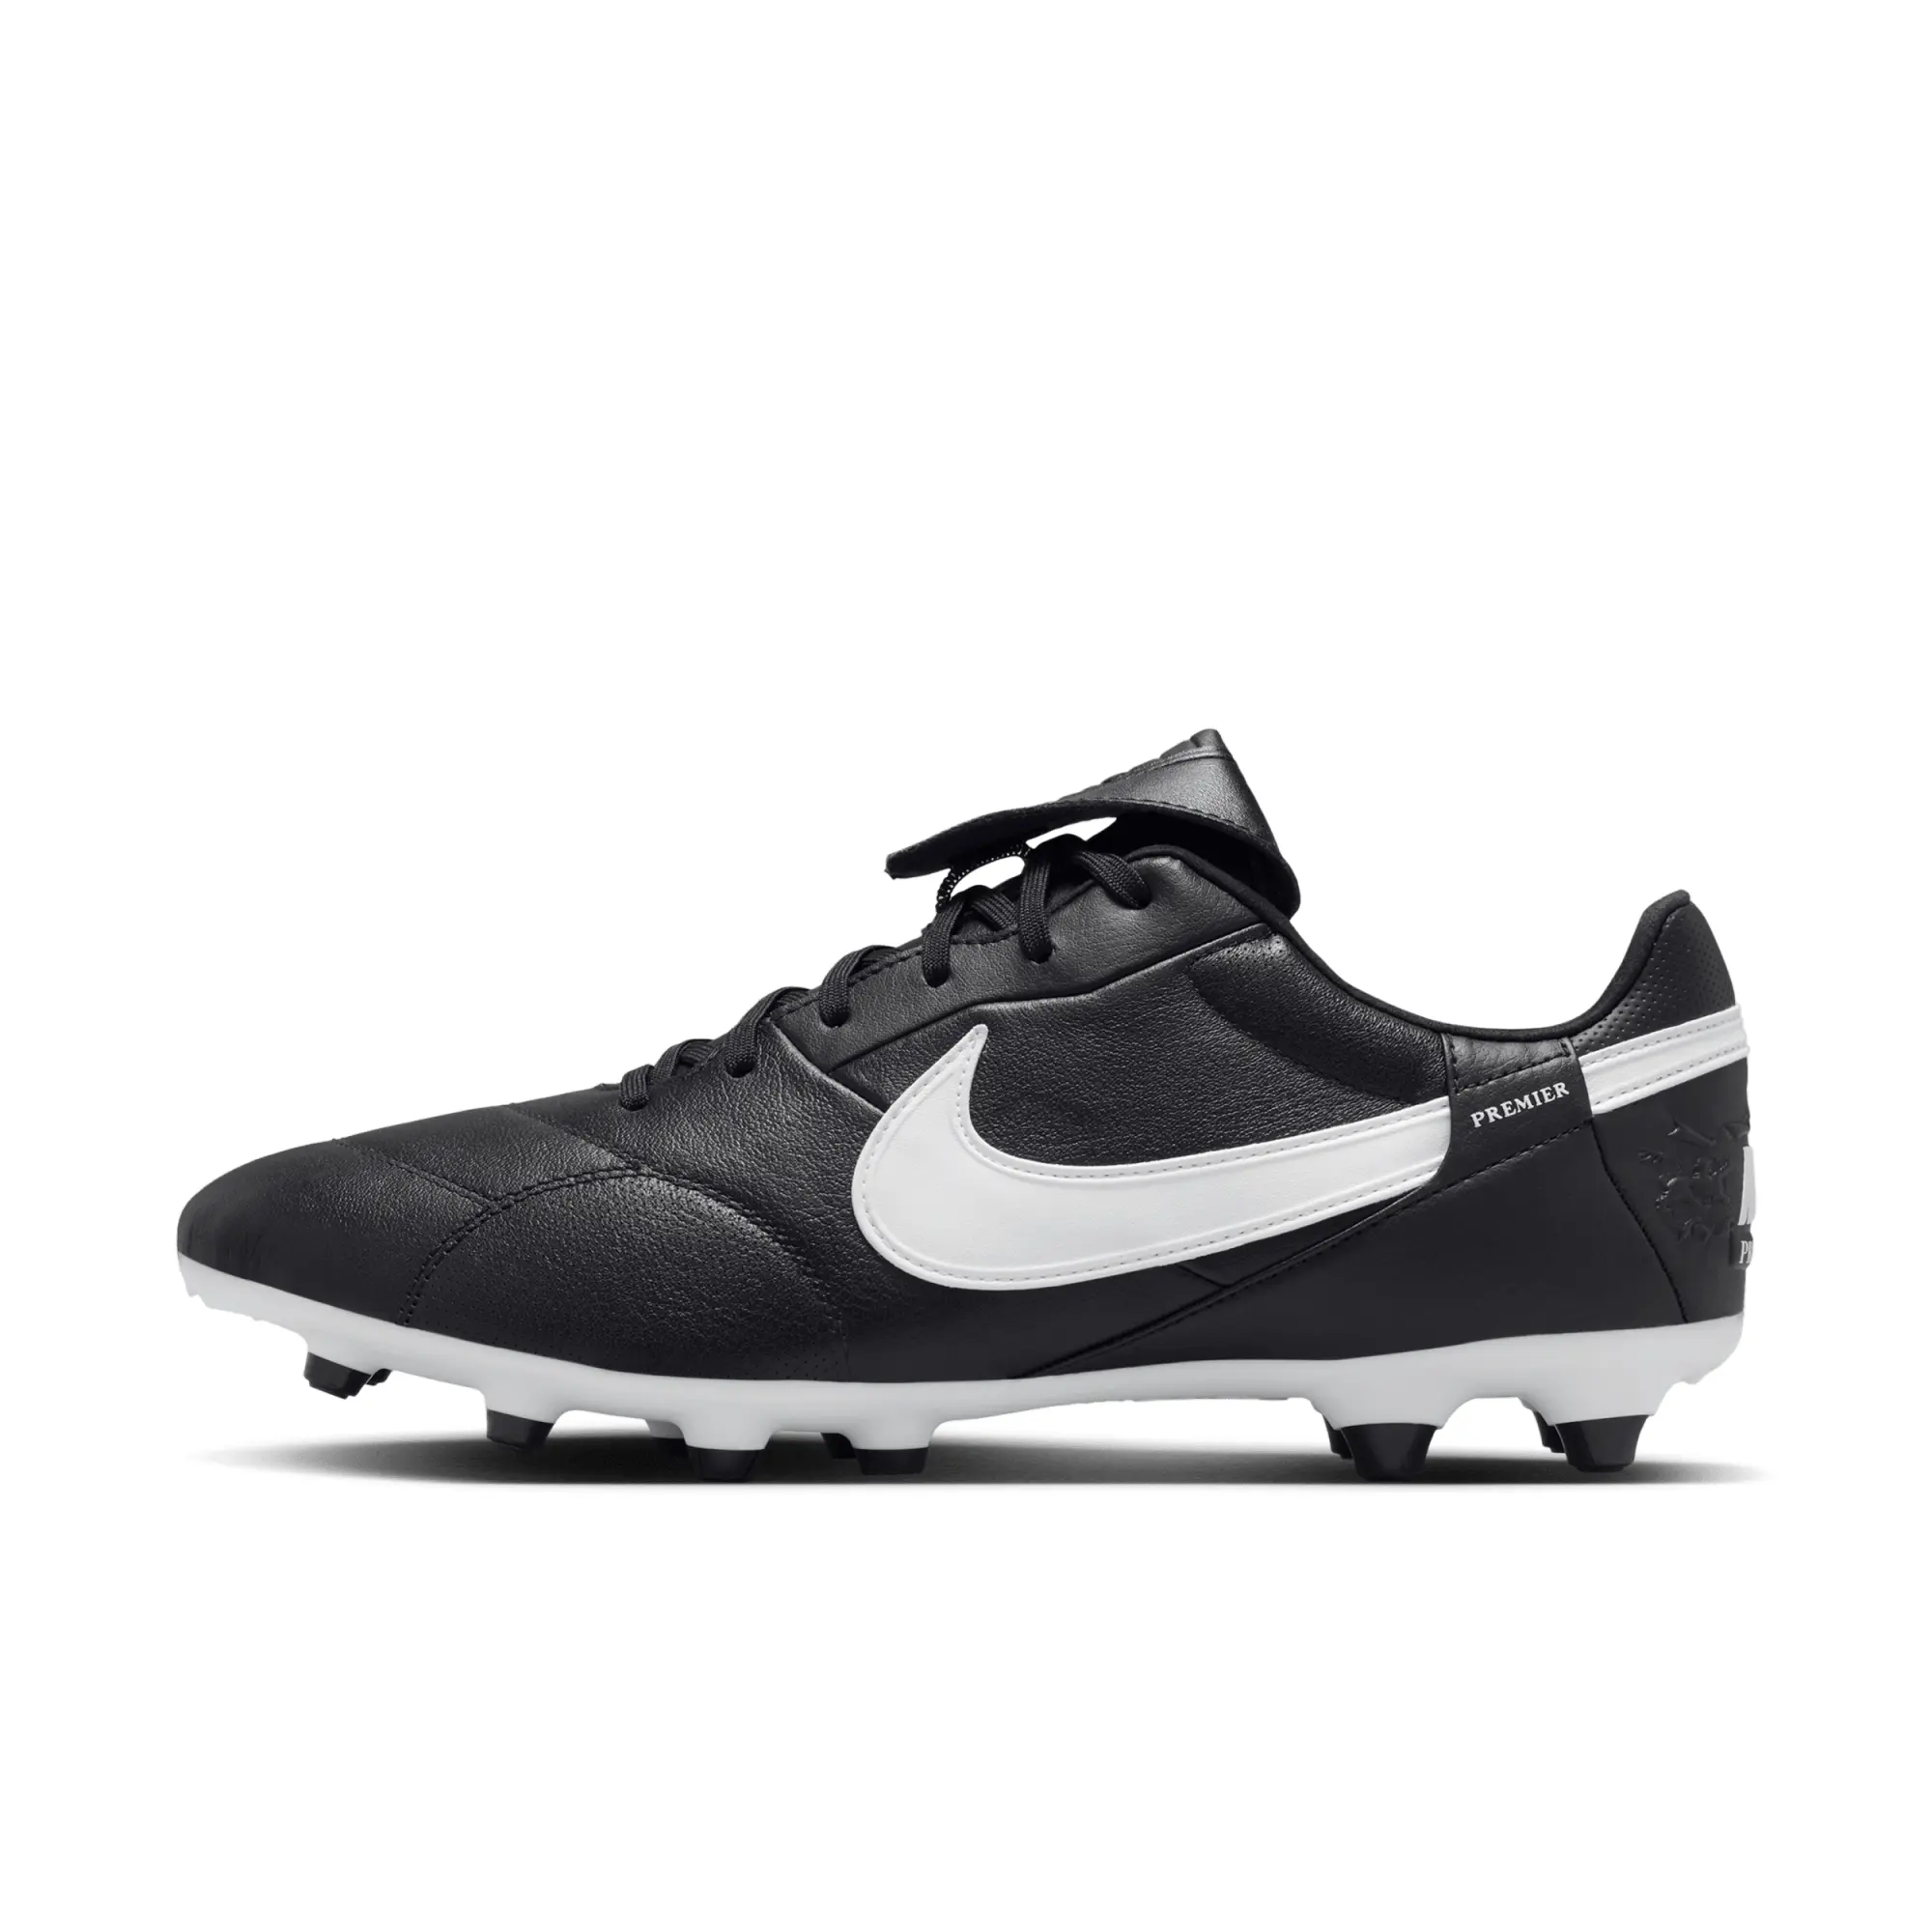 Nike Premier 3 Firm Ground Football Boots - Black